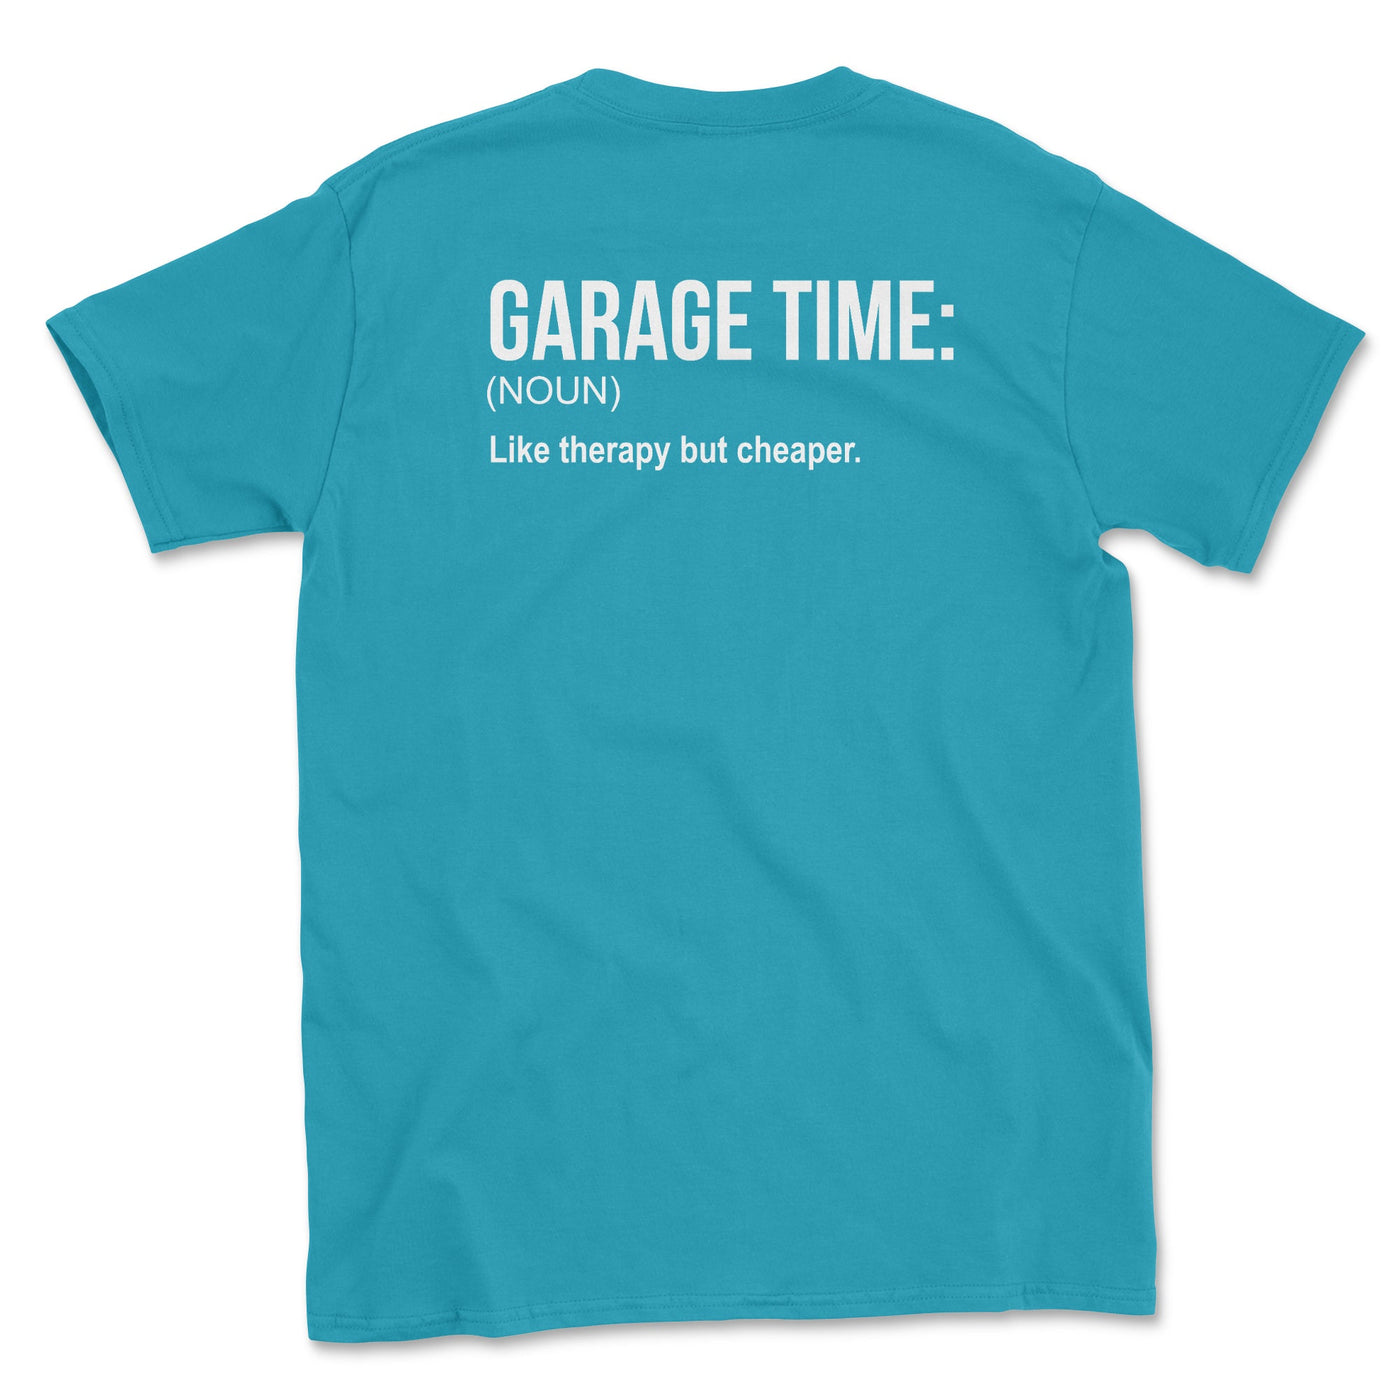 Garage Graphic Tees - Goats Trail Off-Road Apparel Company